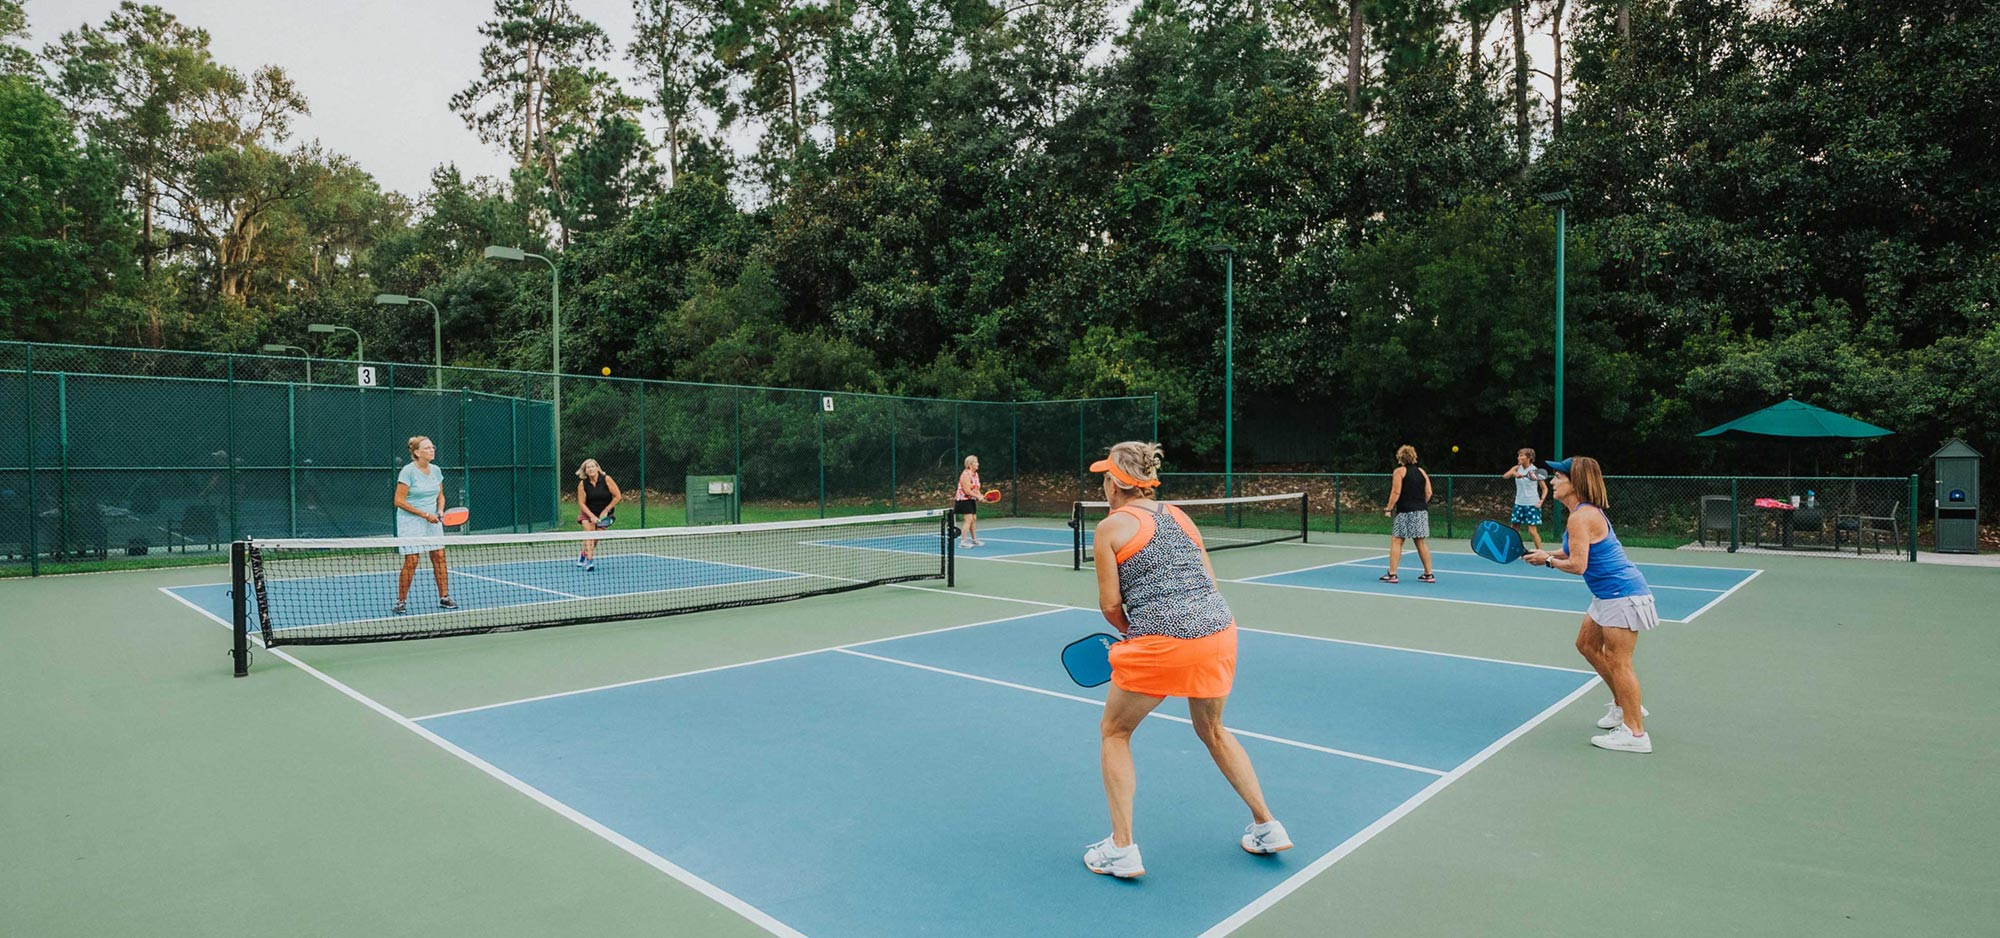 A group of women play on two of the 14 pickleball courts available as part of the Court Sports in the Athletic Club at The Landings.